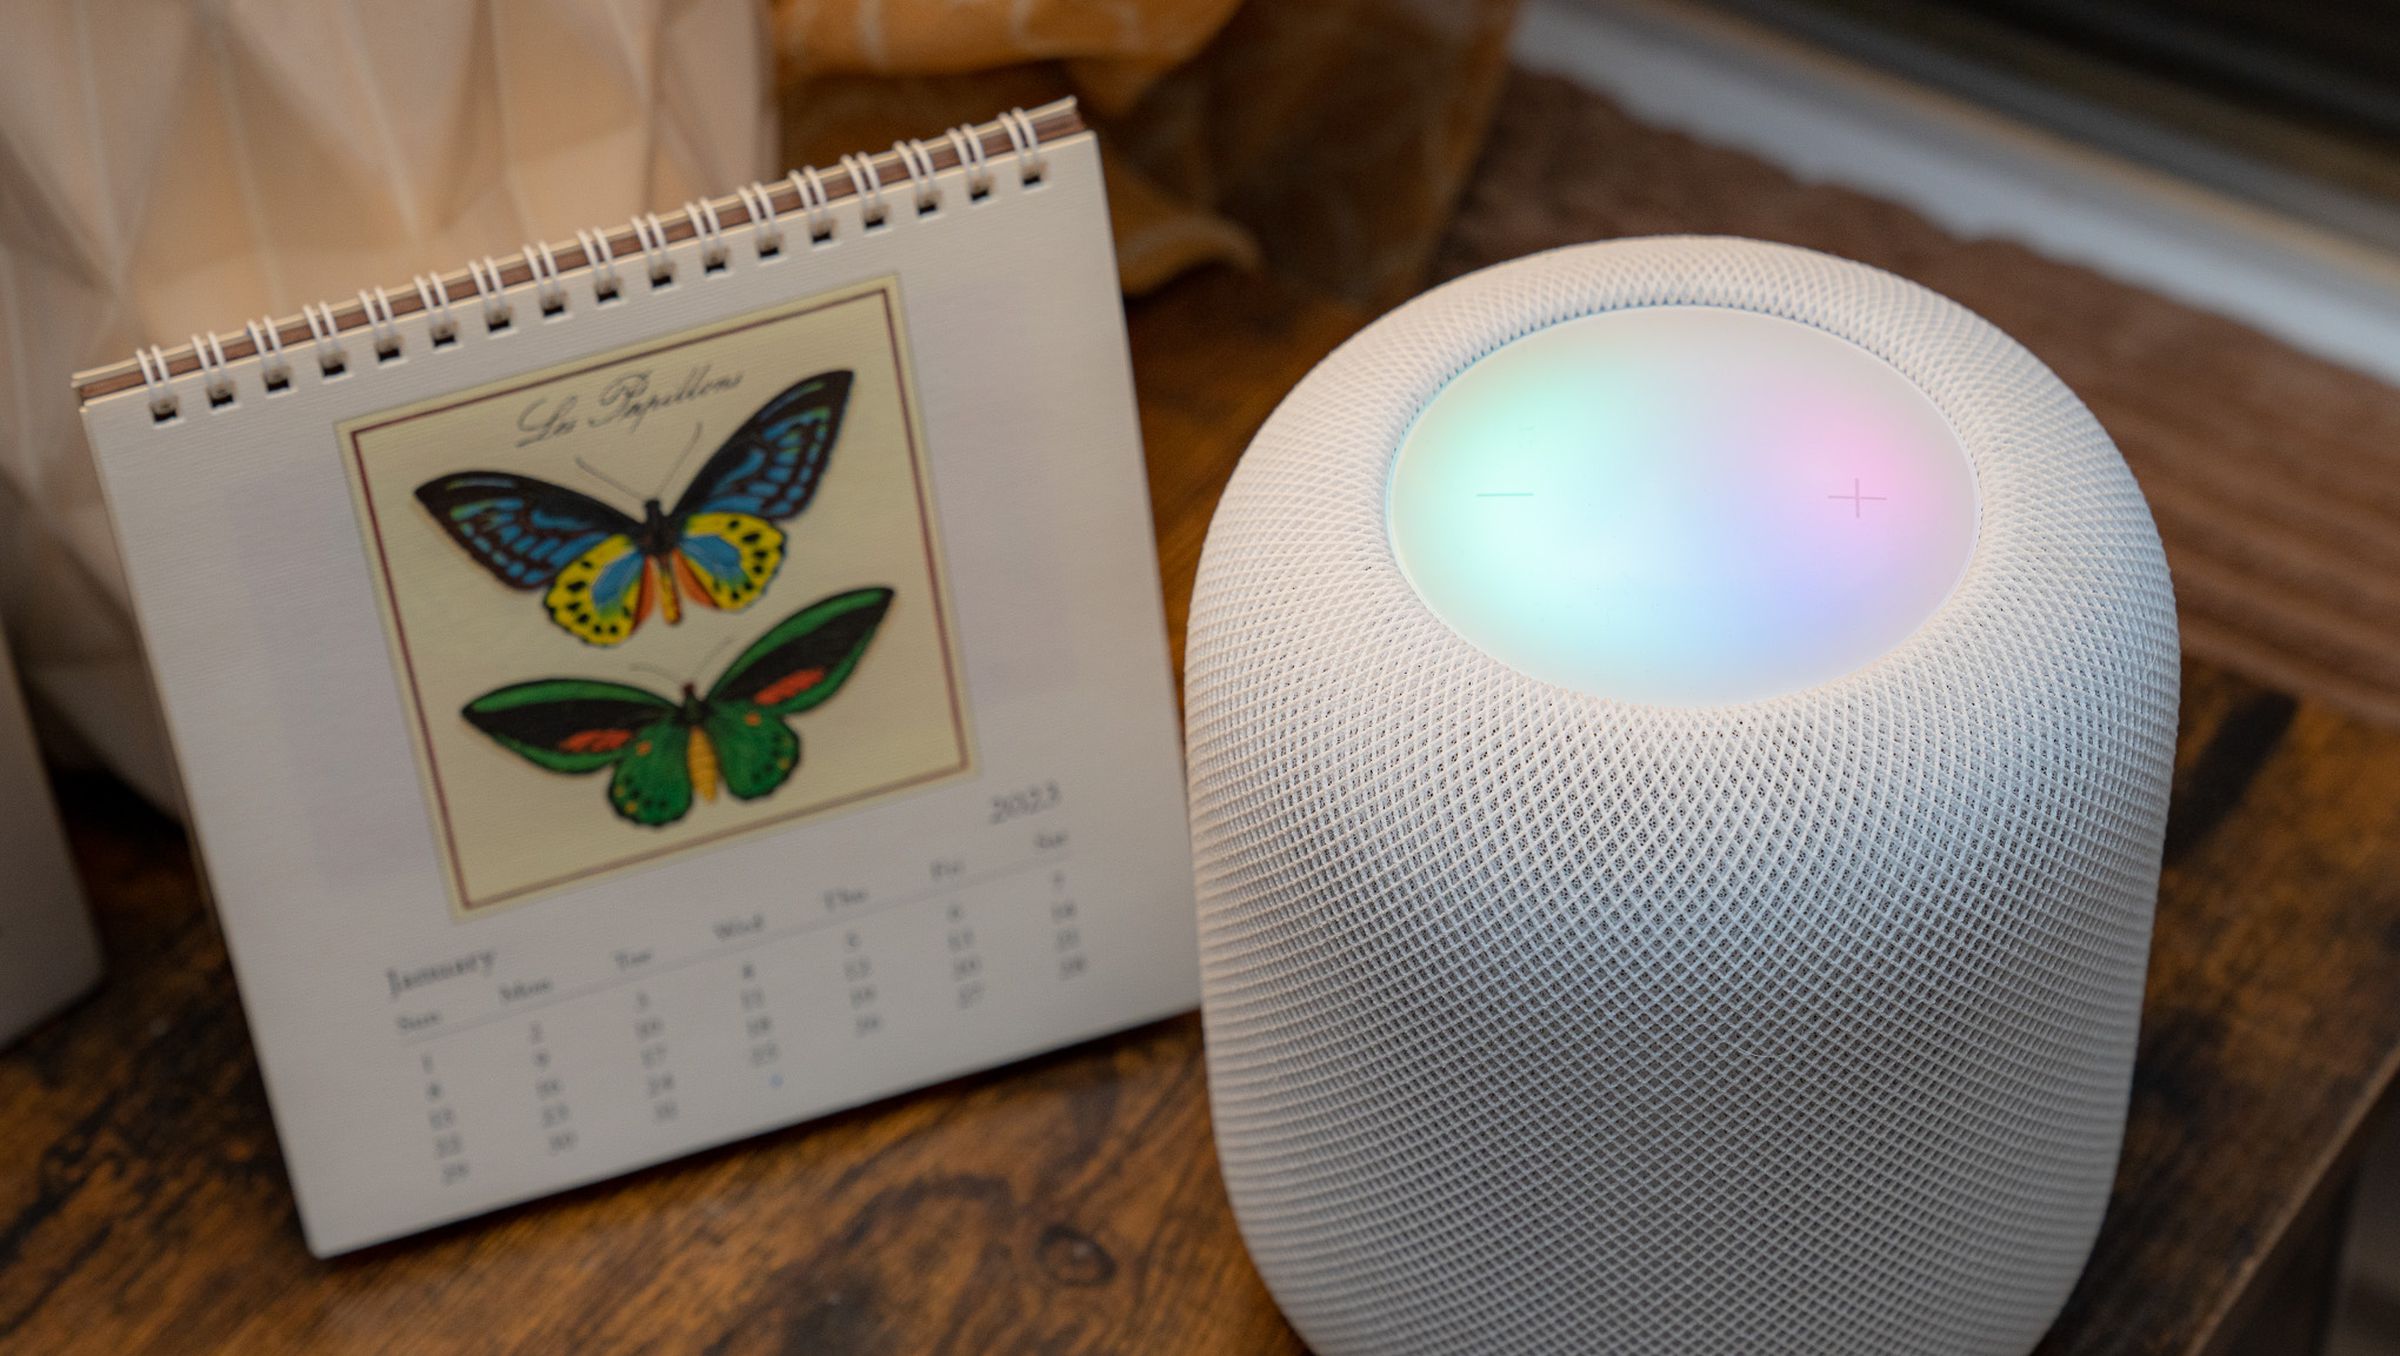 A photo of Apple’s second-generation HomePod with an illuminated touch surface.